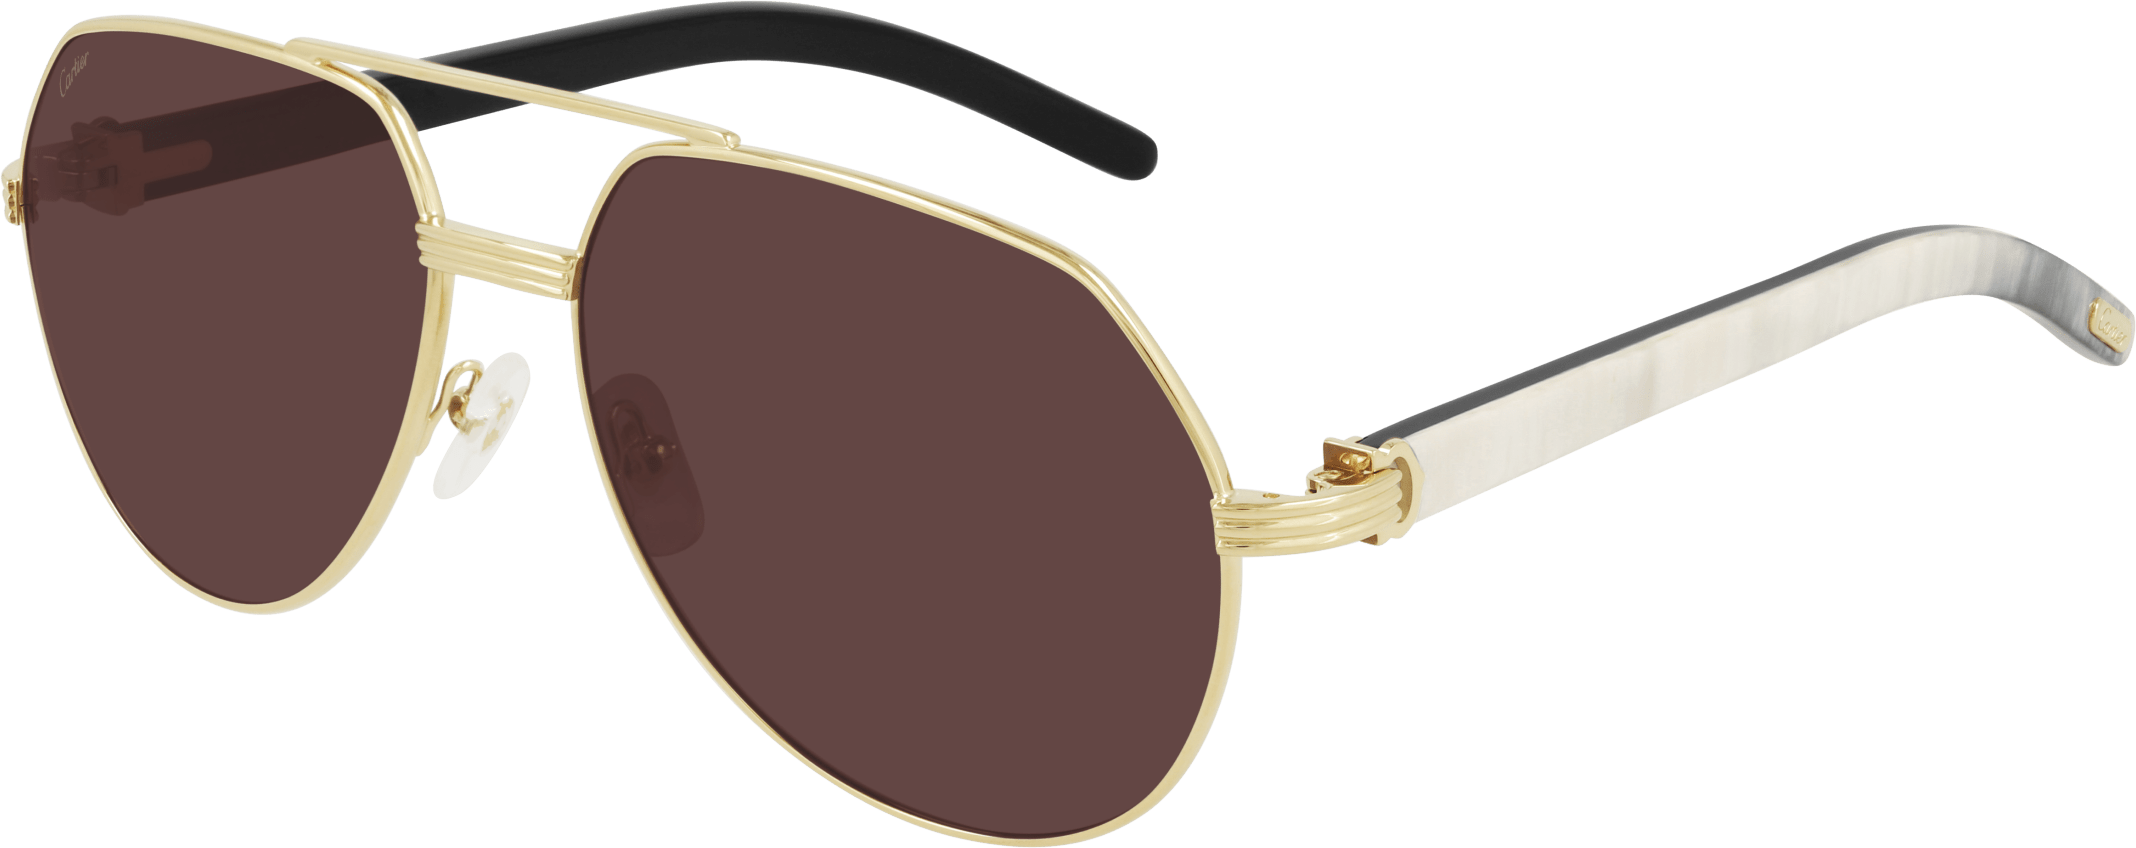 Color_CT0272S-003 - GOLD - VIOLET - AR (ANTI REFLECTIVE) - POLARIZED